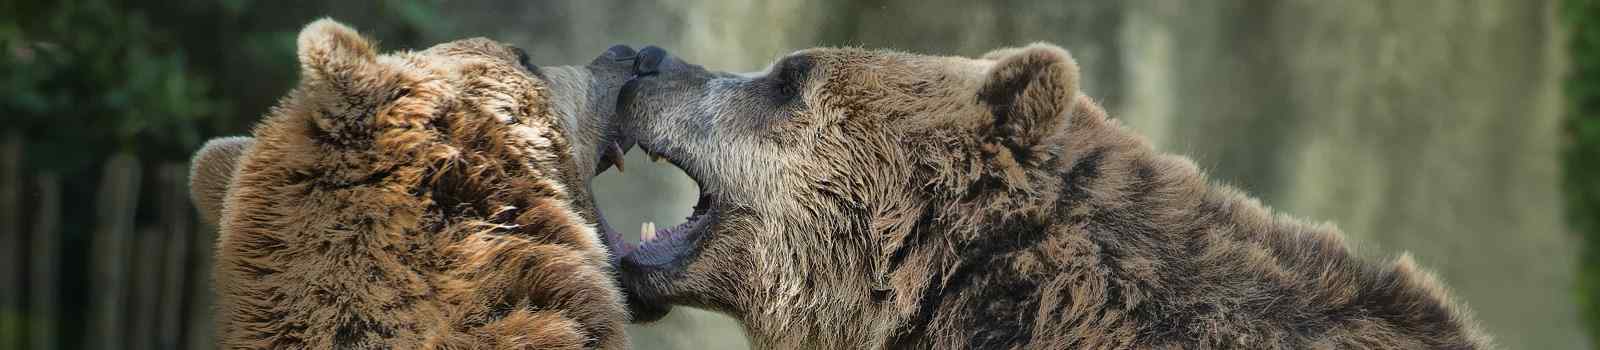 HIGHLIGHTS-ONTARIO -Kanada Two brown grizzly bears while fighting close up portrait